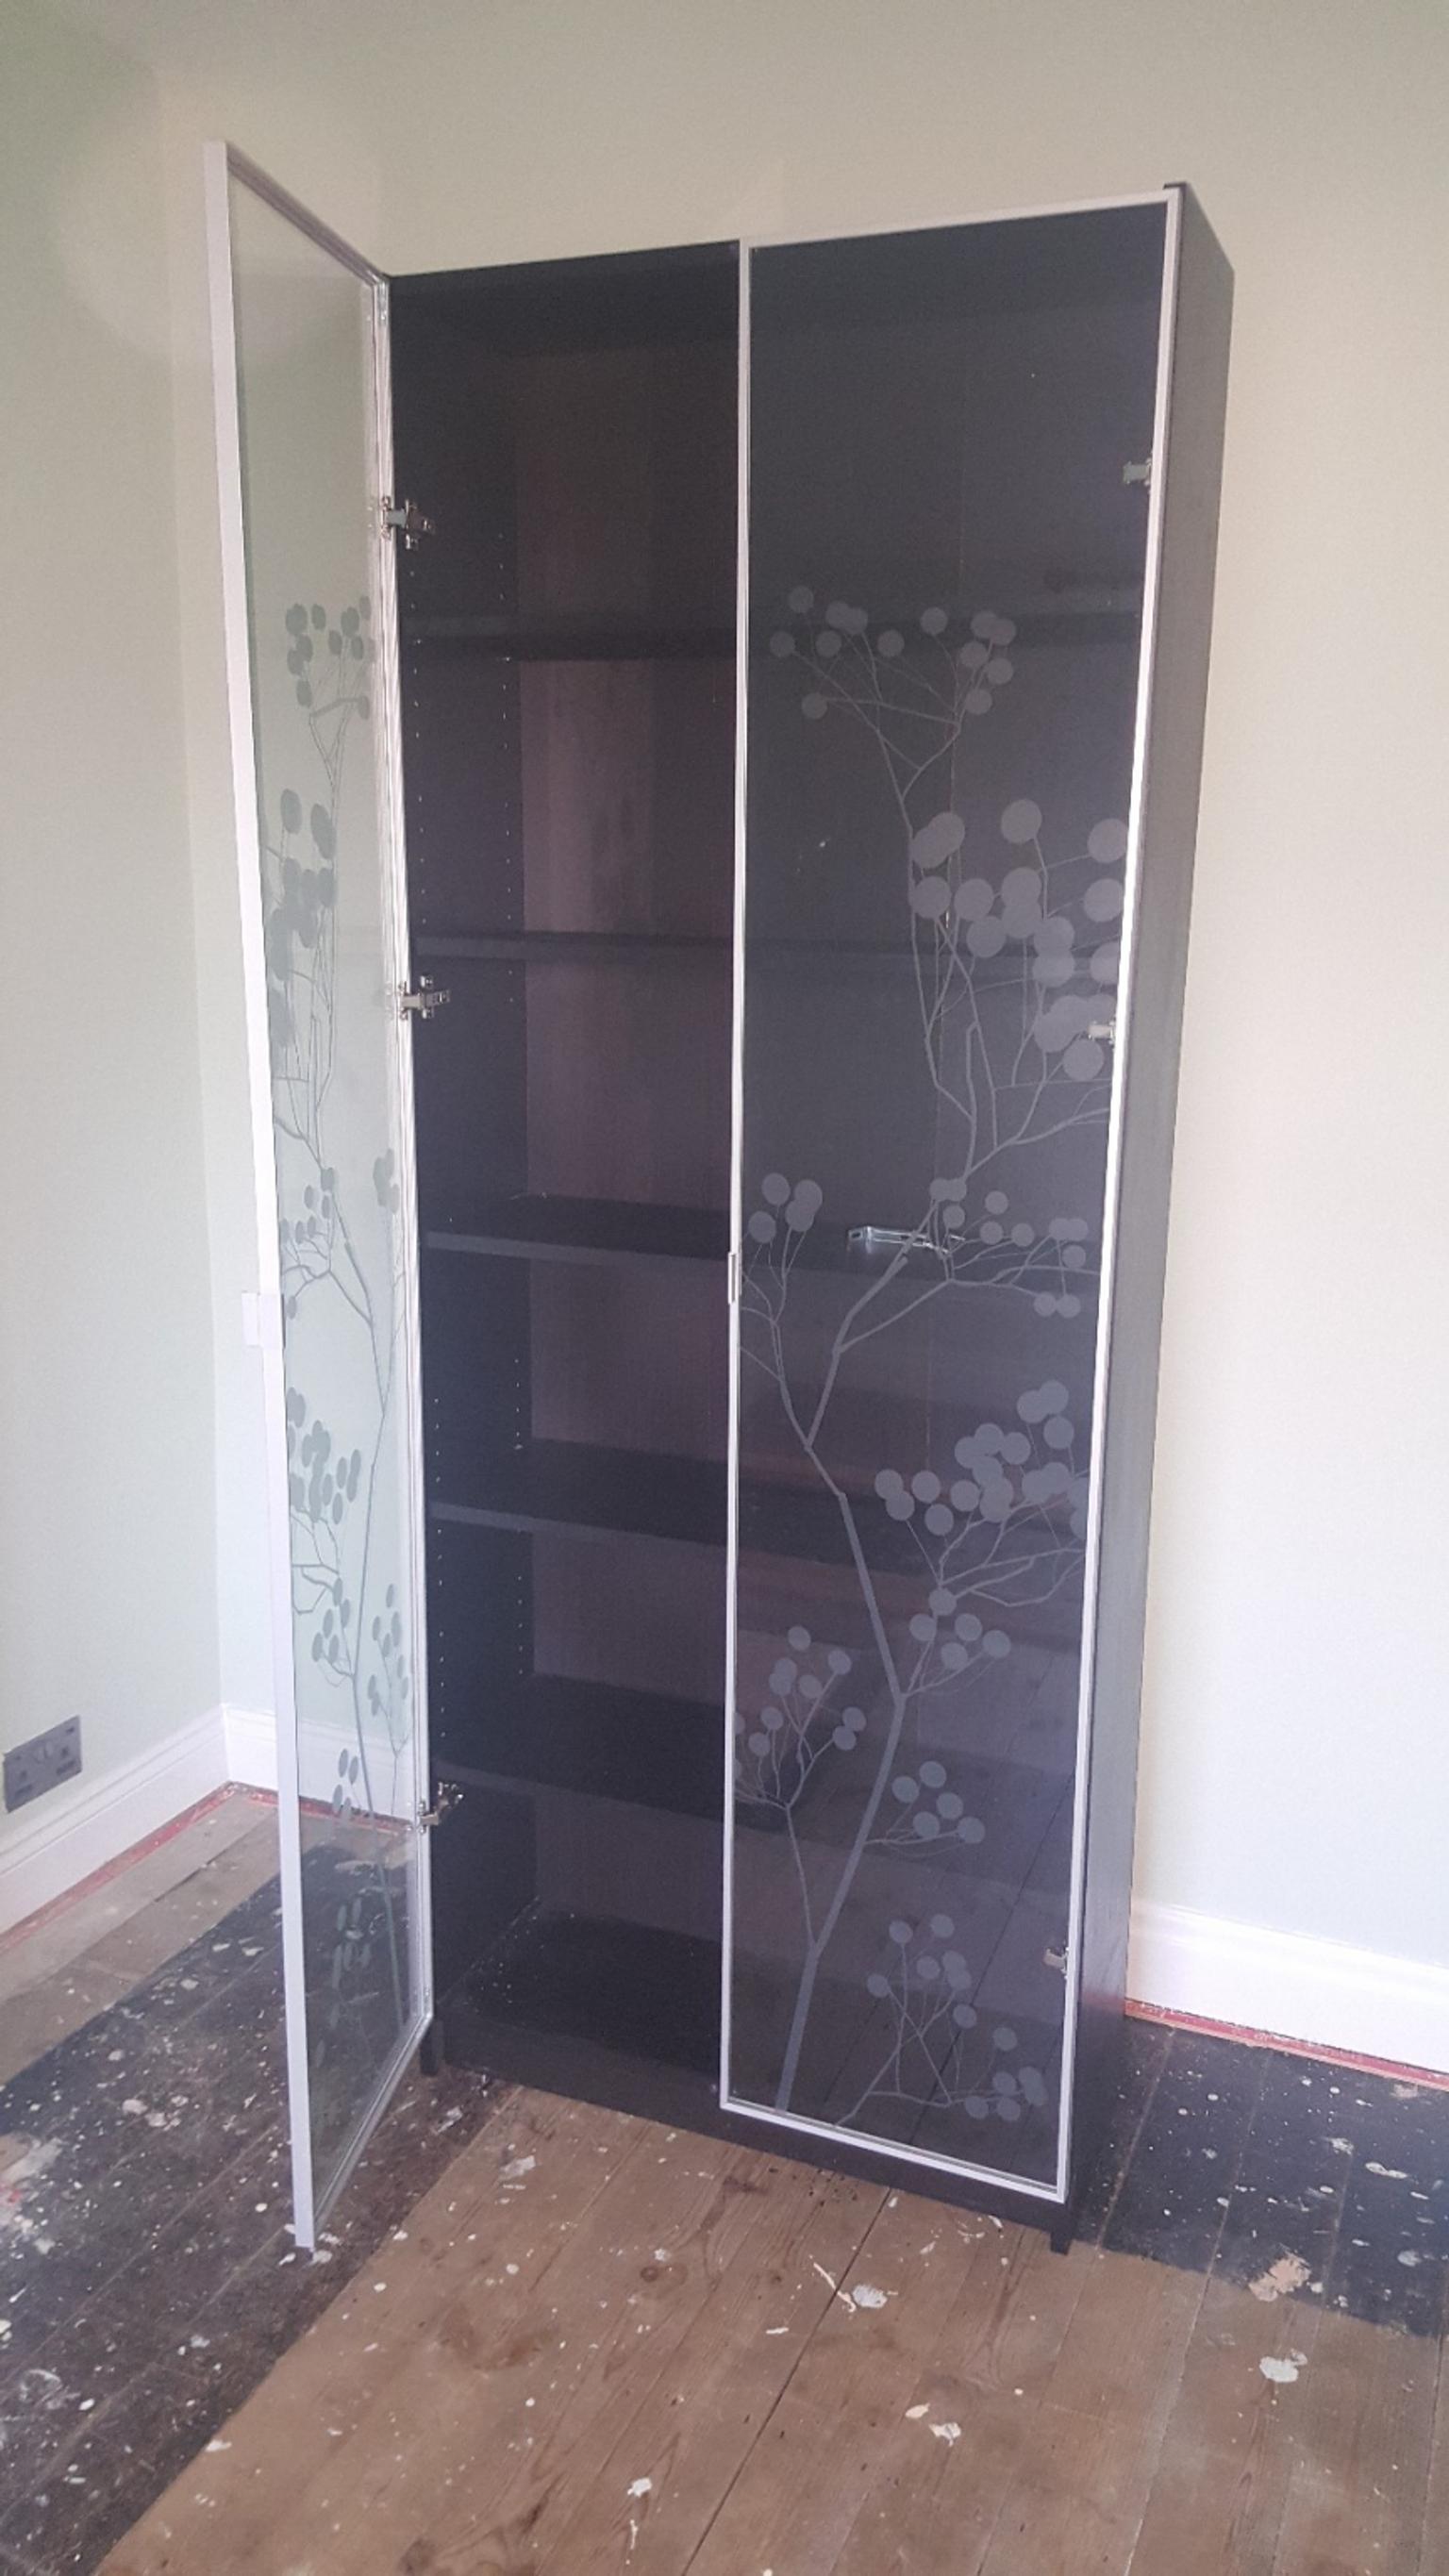 Ikea Billy Bookcase With Glass Doors In Ls13 Leeds For 15 00 For